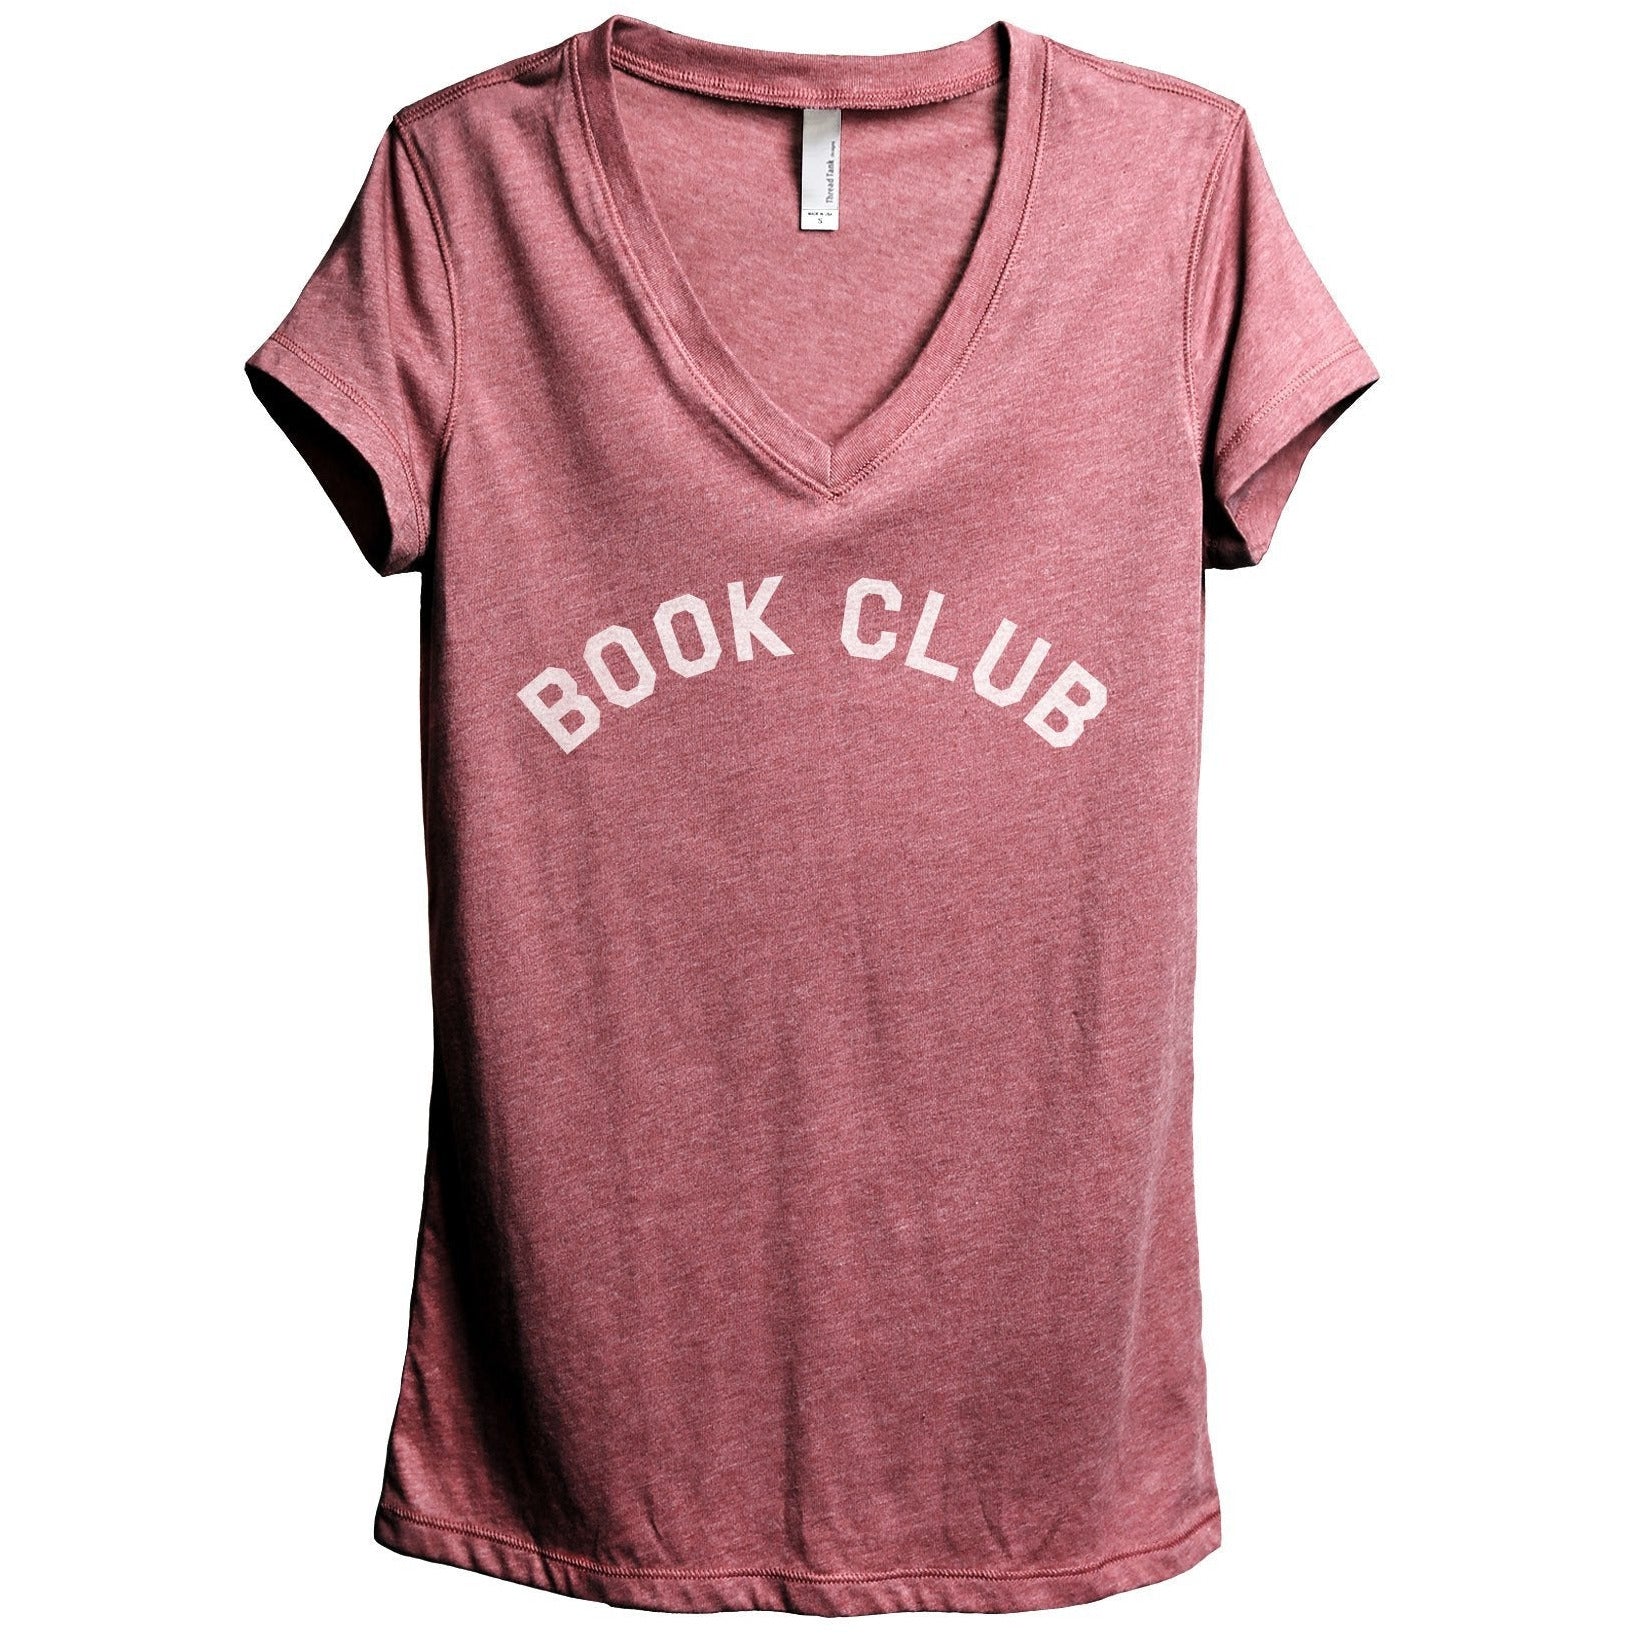 Book Club Women's Relaxed Crewneck T-Shirt Top Tee Heather Rouge
